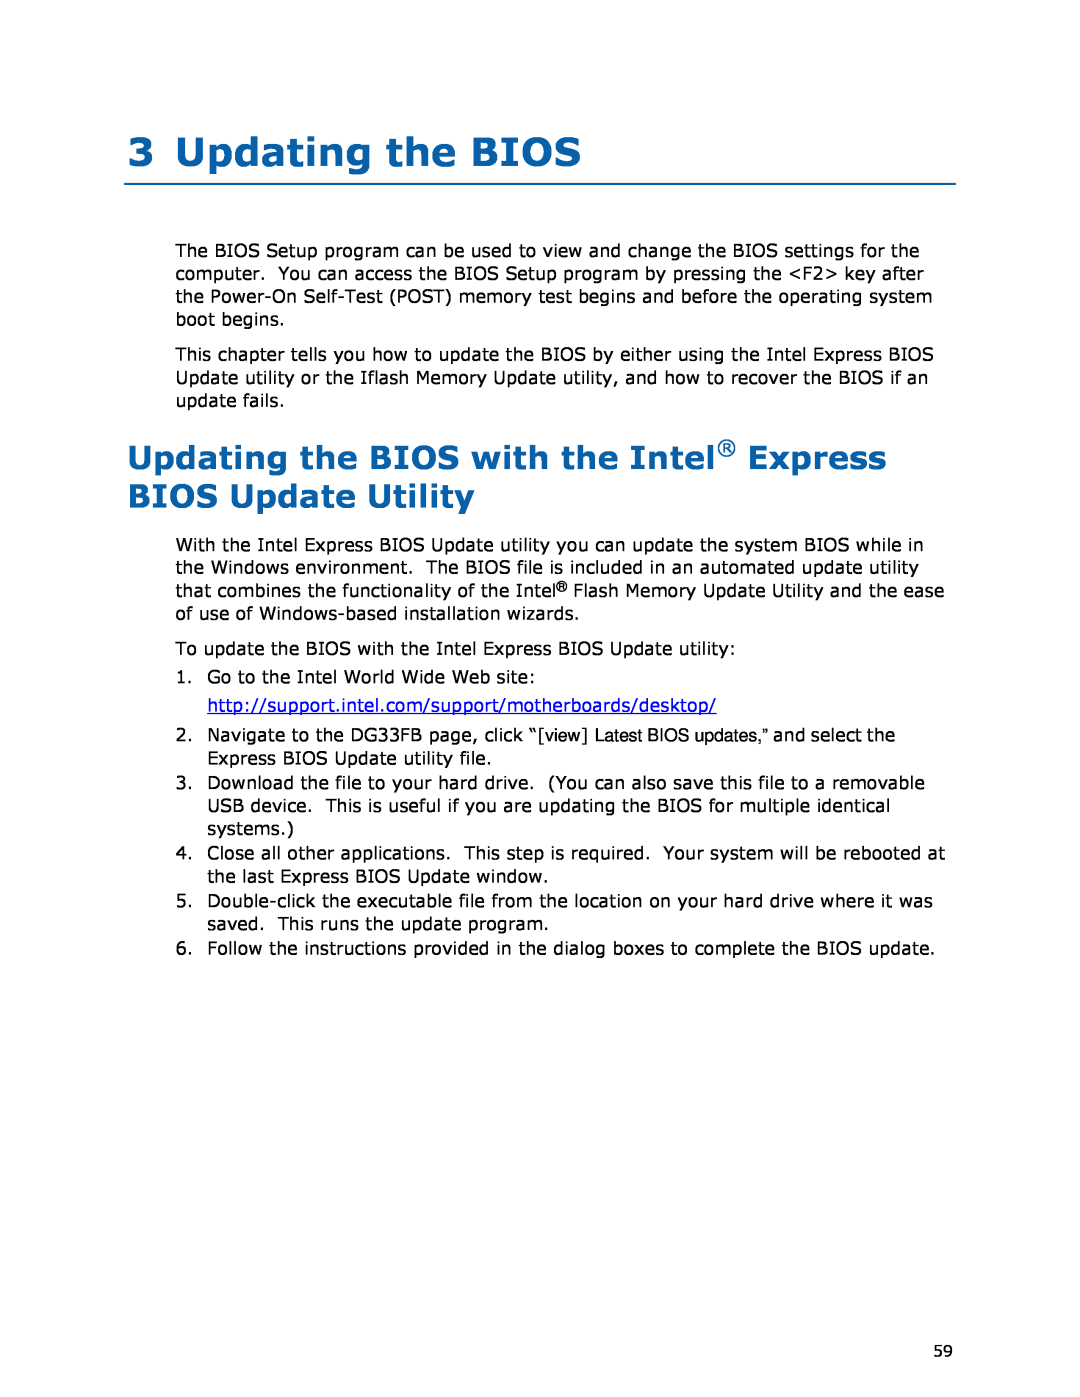 Intel DG33FB manual Updating the BIOS with the Intel Express, BIOS Update Utility 